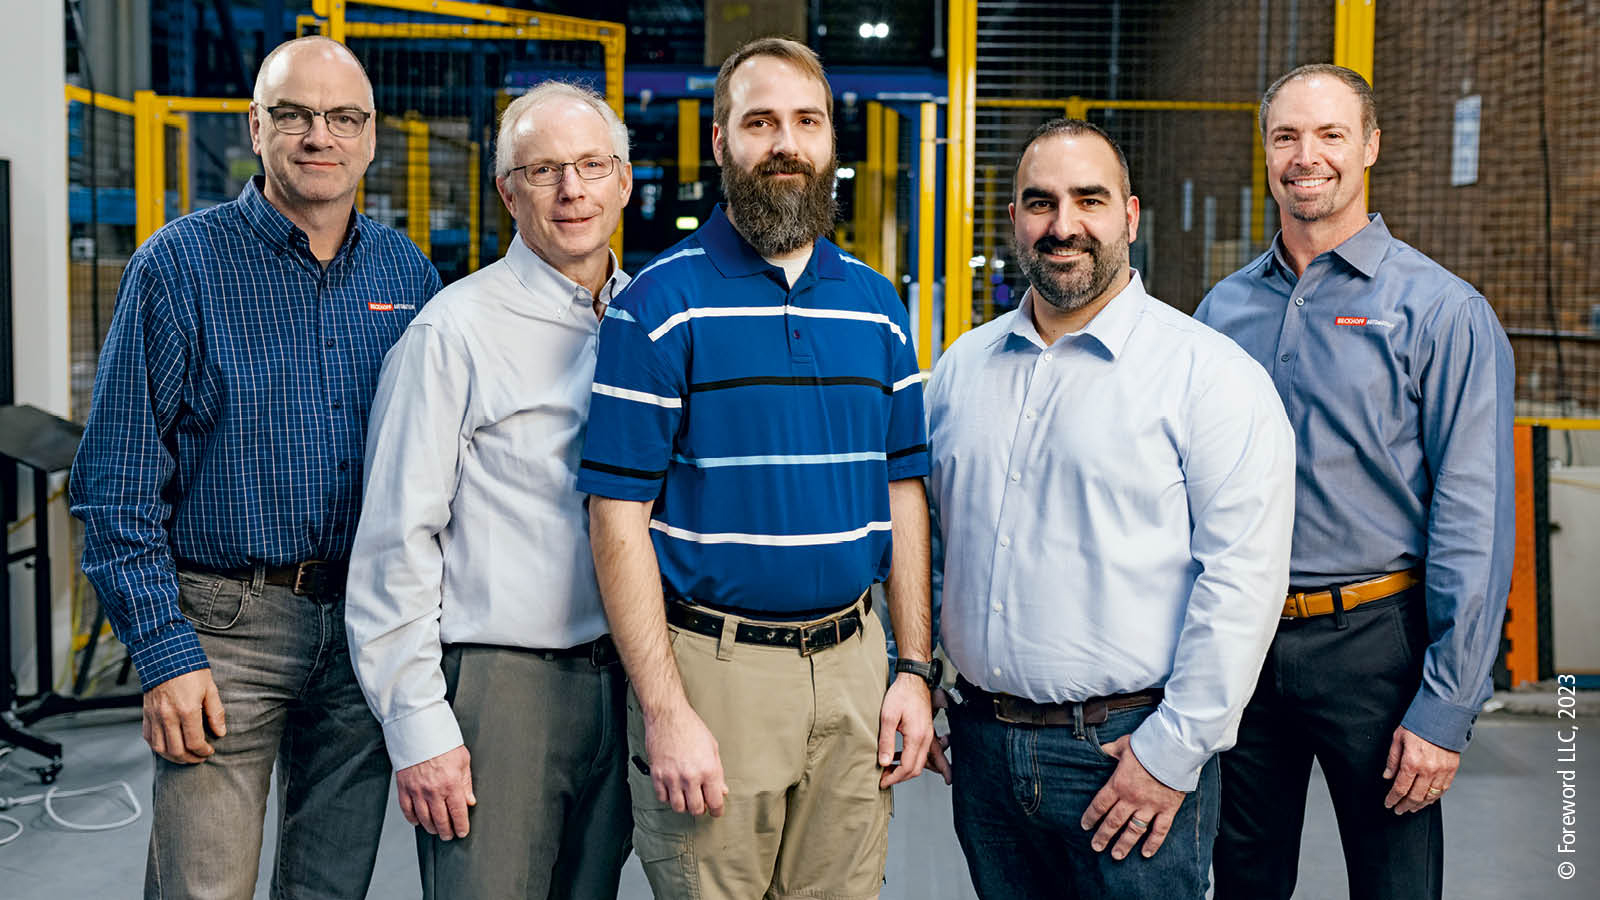 Automation and robotics experts gather at the Boston Dynamics test facility: (from left) Gilbert Petersen, Intralogistics Industry Application Specialist at Beckhoff; Brian Buck, Regional Sales Manager at Beckhoff; Matthew Meduna, Technical Director of Hardware Engineering, Stretch at Boston Dynamics; Eric Landry, Director, Supply Chain at Boston Dynamics; and Doug Schuchart, Global Material Handling and Intralogistics Manager at Beckhoff. 